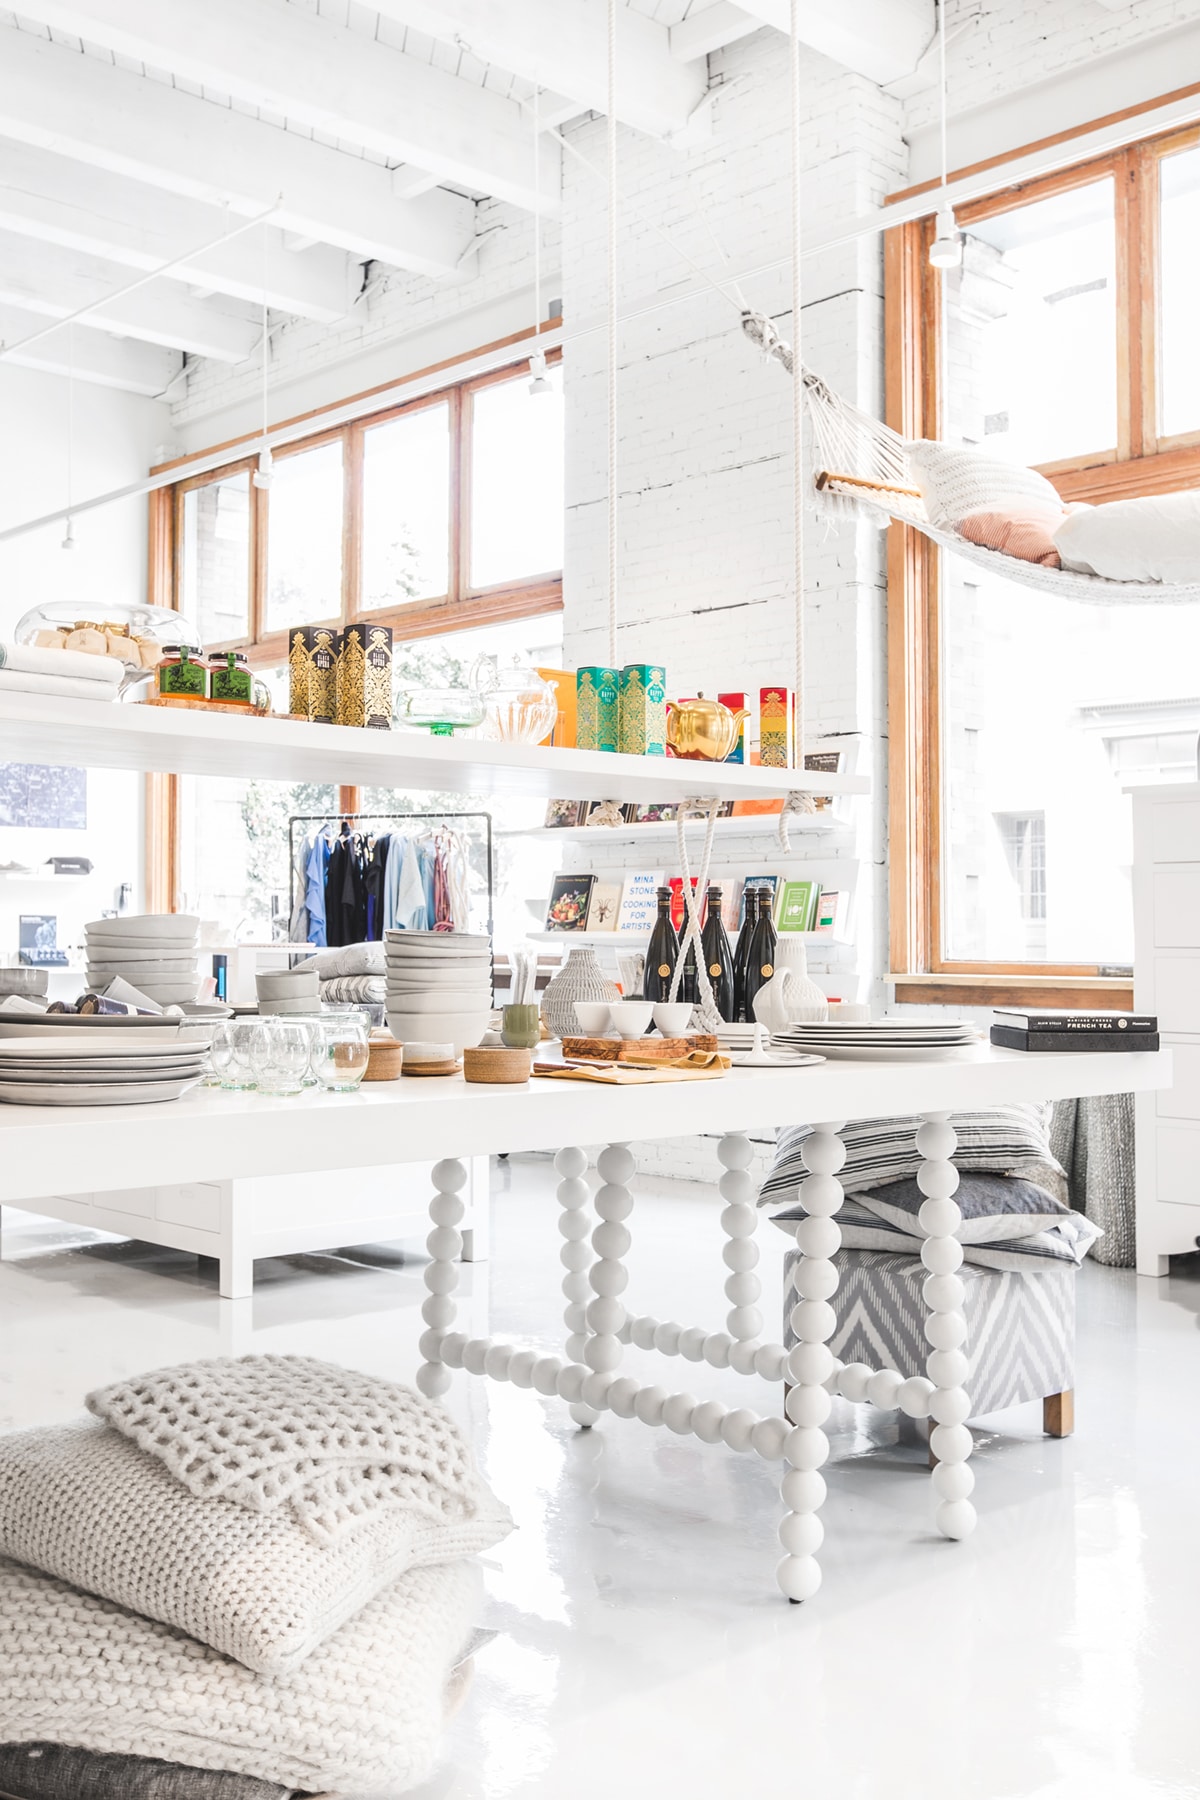 Flora & Henri - a stunning lifestyle shop in Seattle | full tour on coco kelley